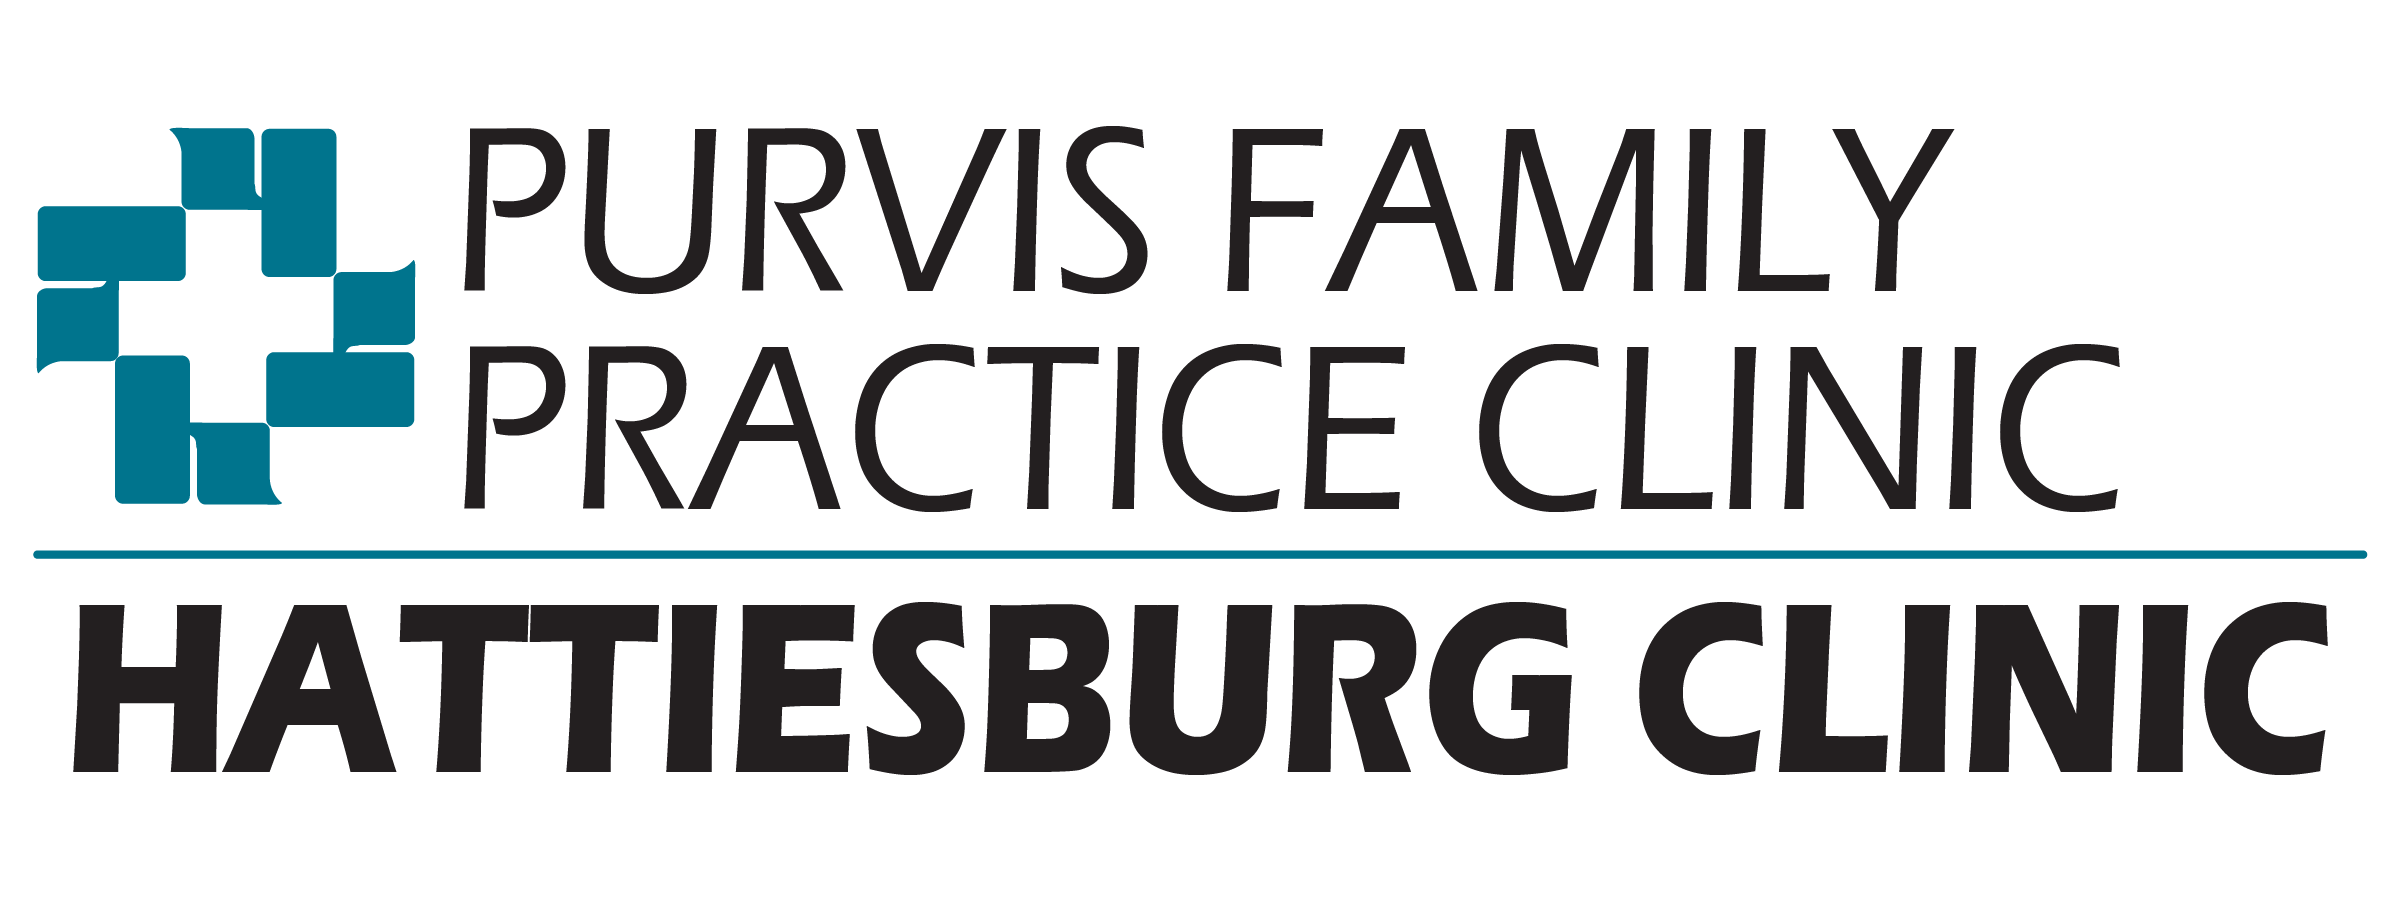 Purvis Family Practice Clinic logo